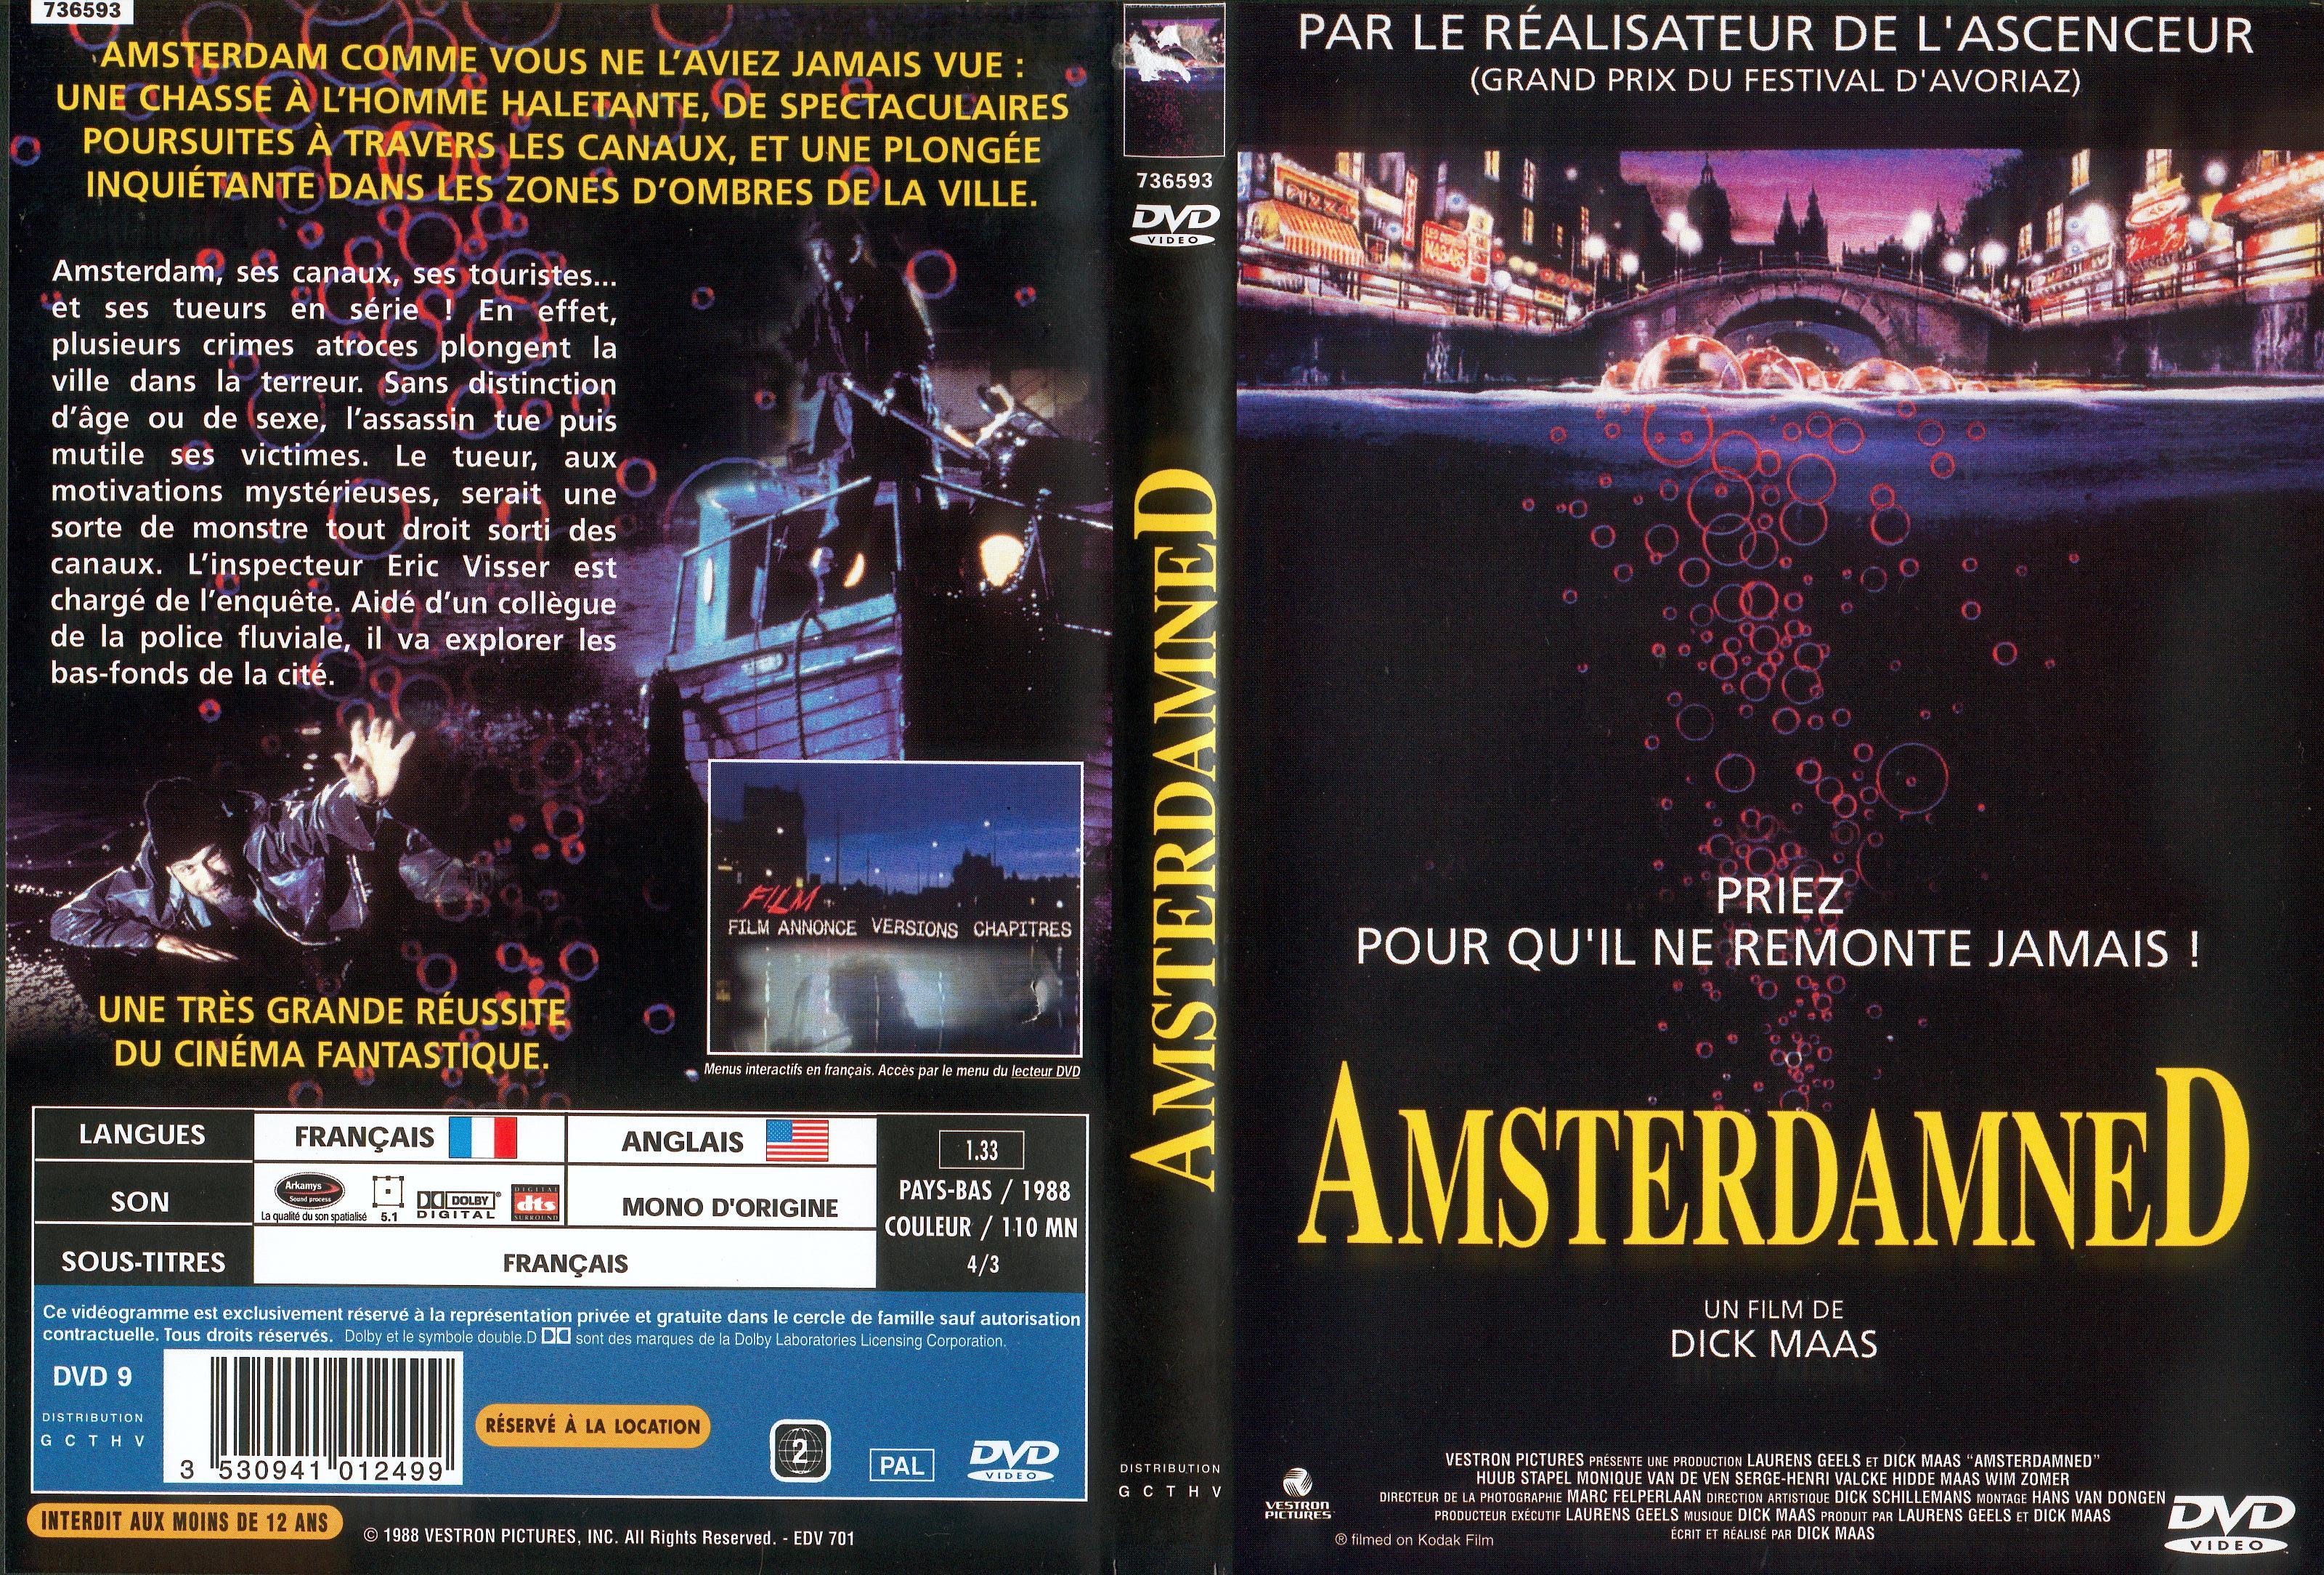 Jaquette DVD Amsterdamned